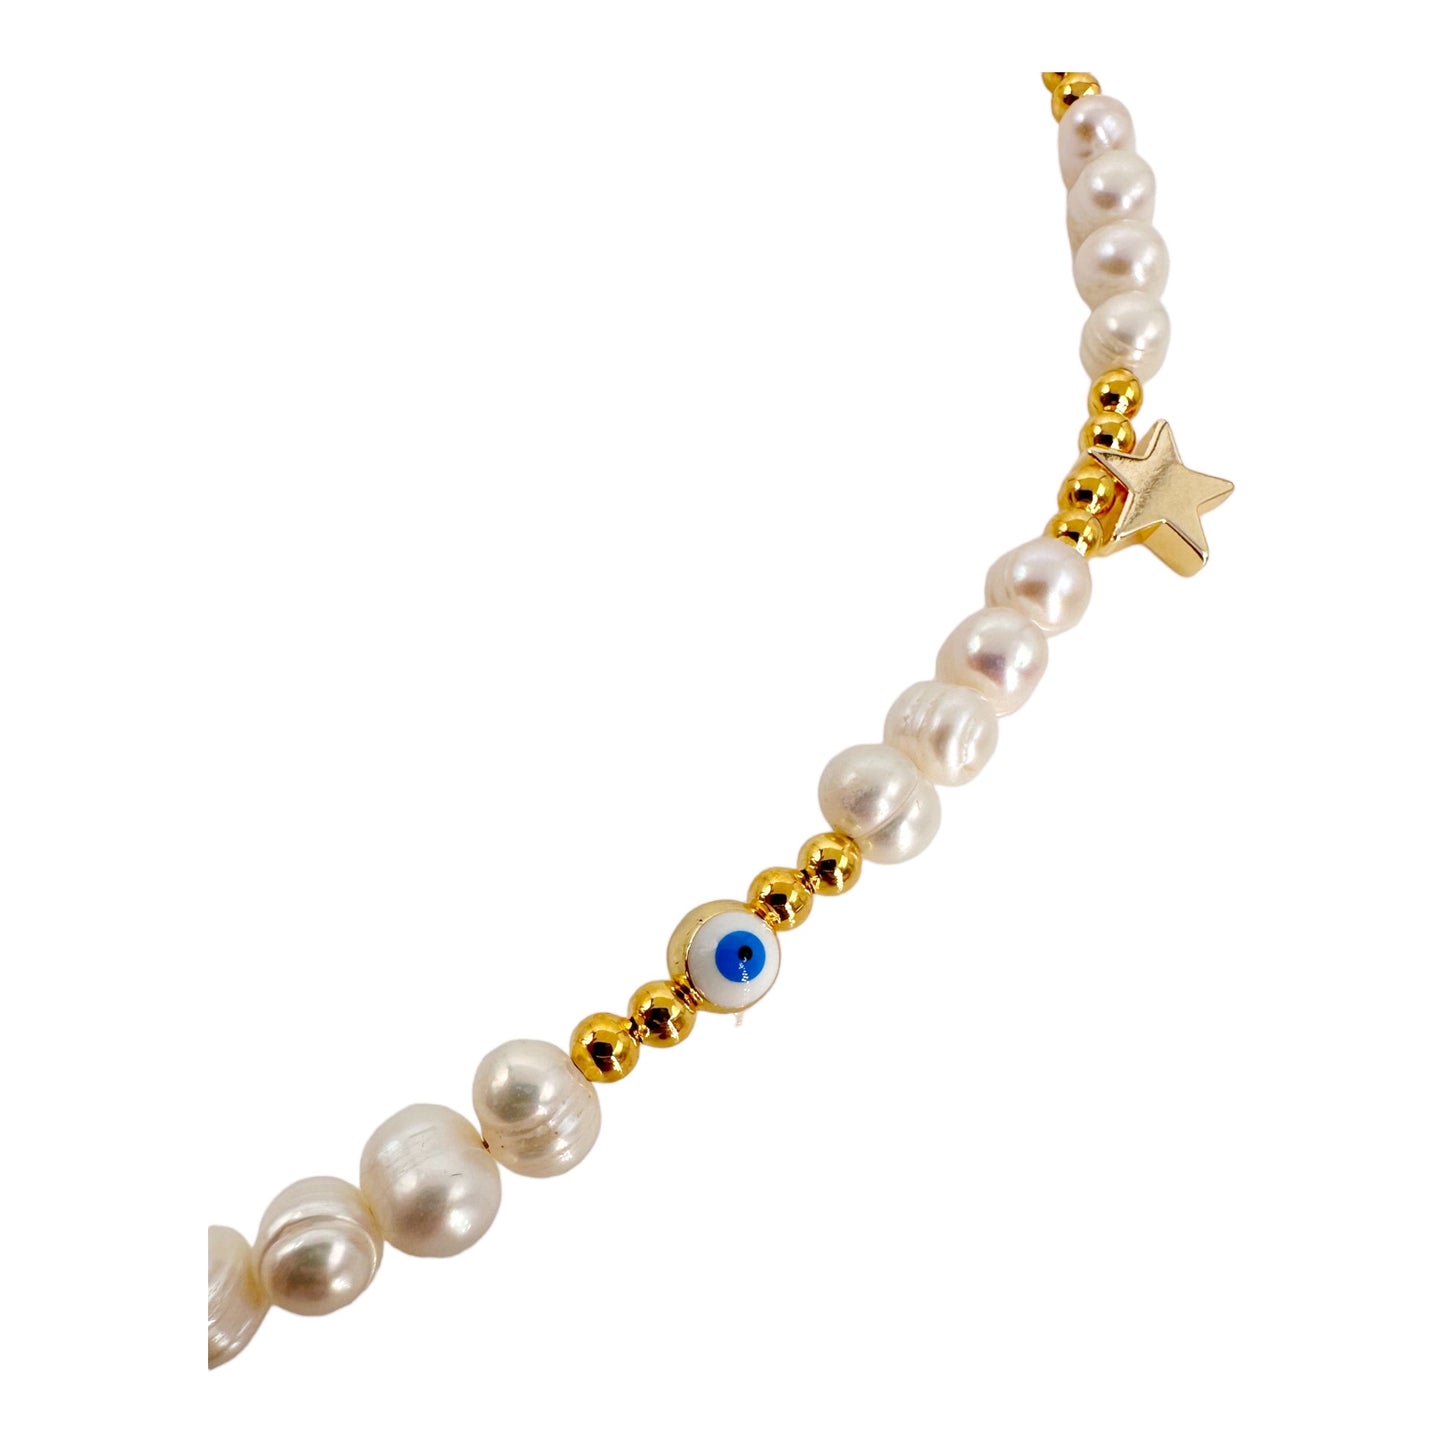 Boho Chic Gold-Plated Choker Necklace with Pearl, Beads, and Starry Accents - Handcrafted by Leslie Boules